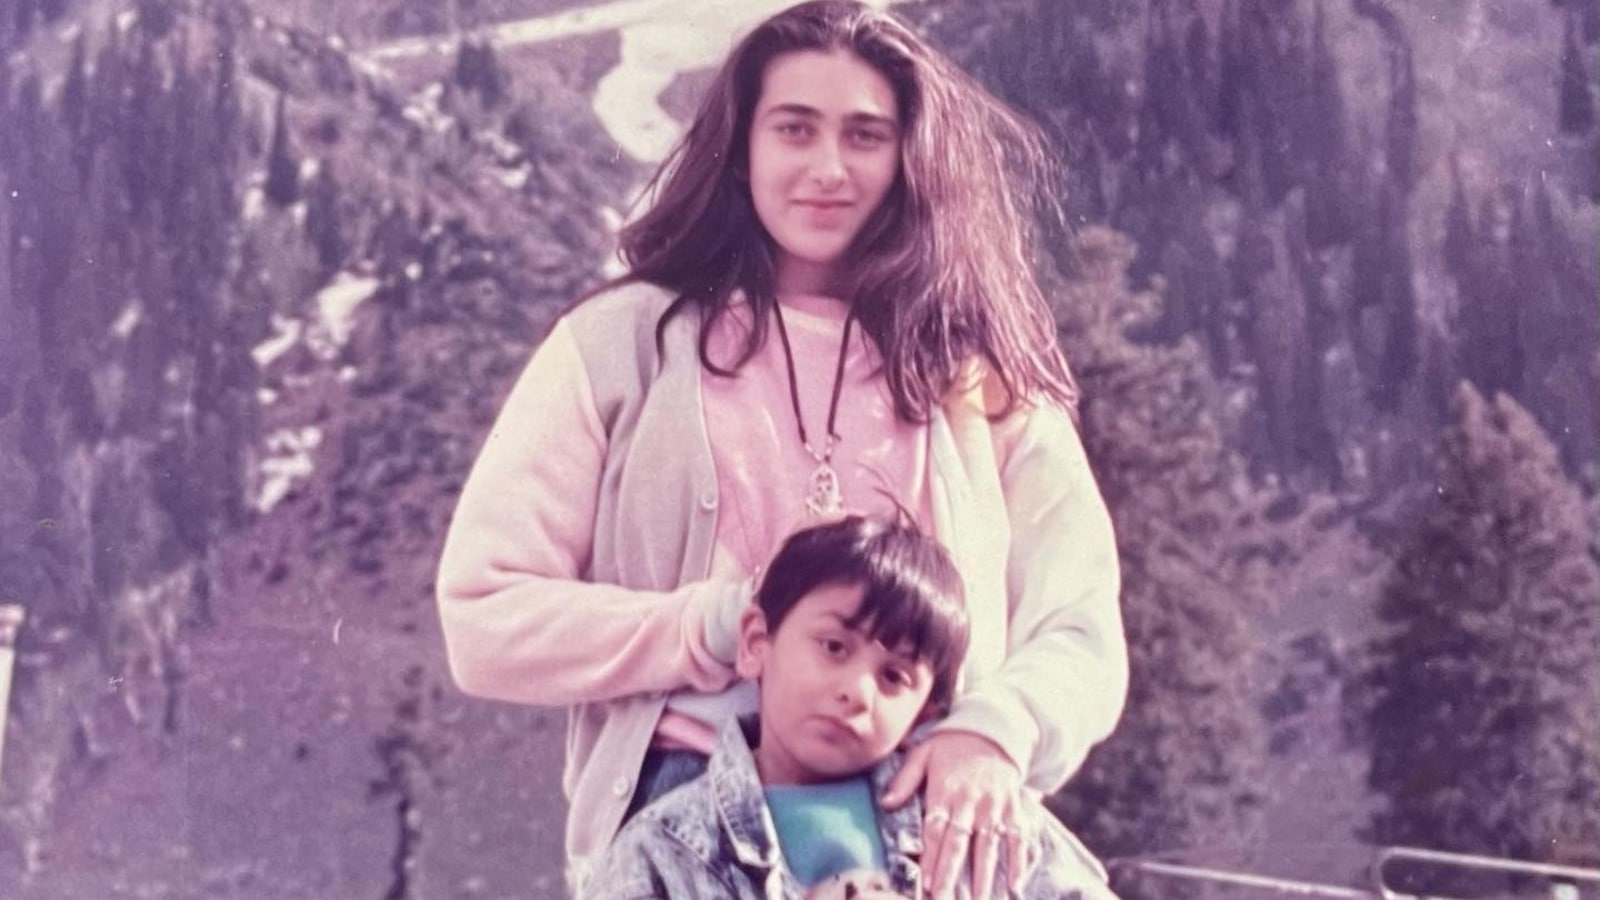 Karisma Kapoor wishes ‘soon to be dad’ Ranbir Kapoor on his 40th birthday with childhood pic. See here